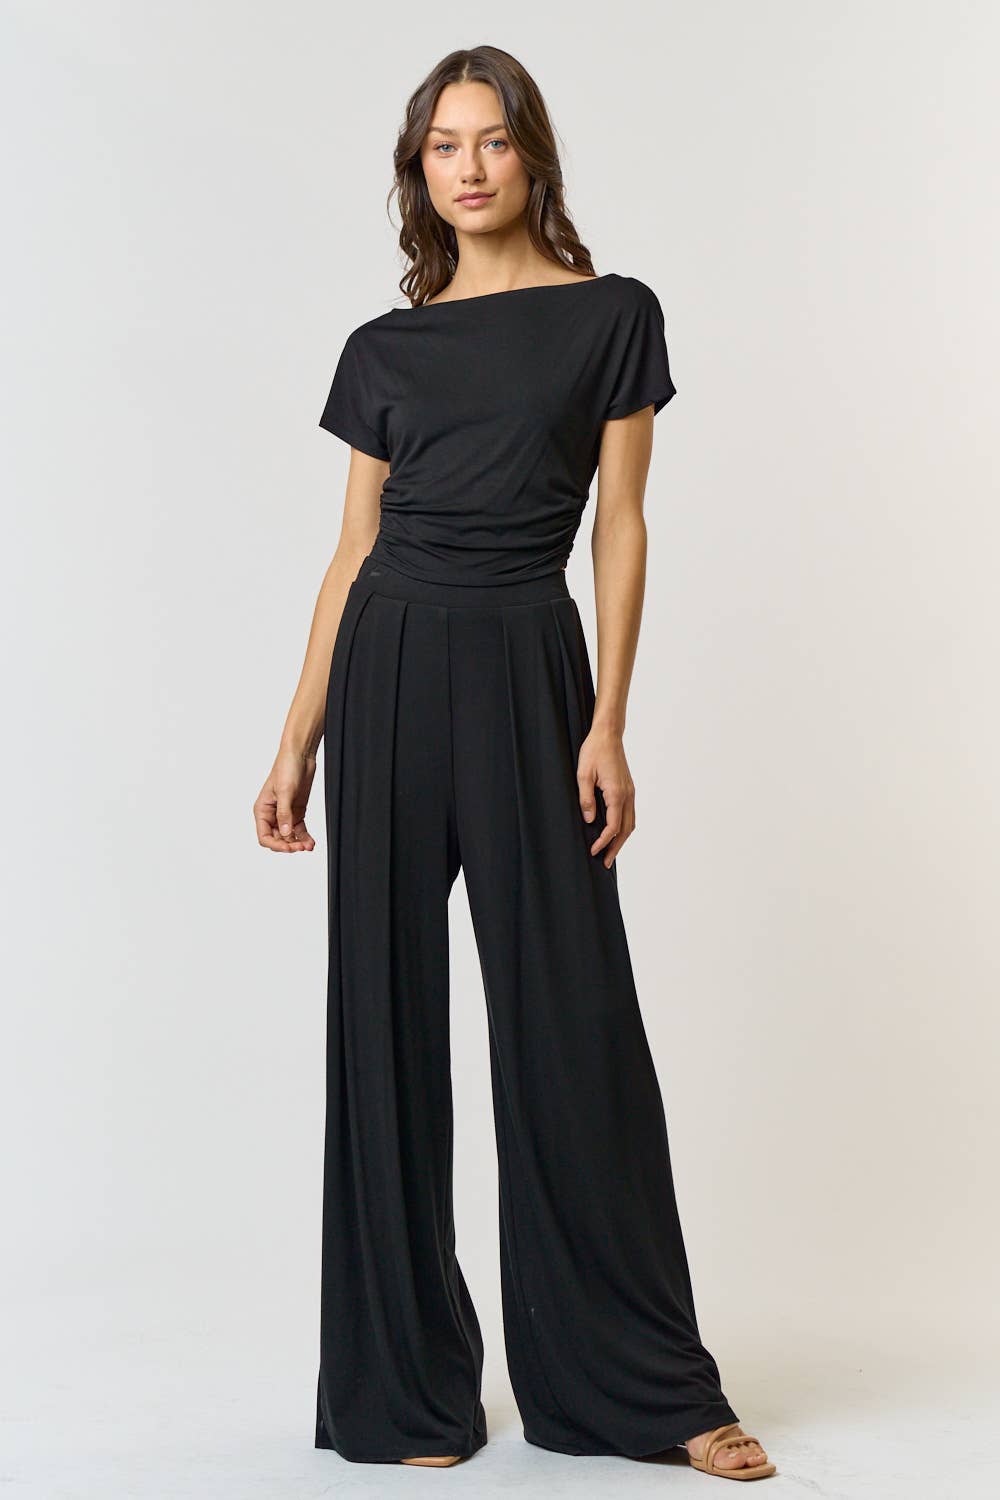 Lalavon - Boat Neck Ruched Top and Wide Leg Pant Set - Black